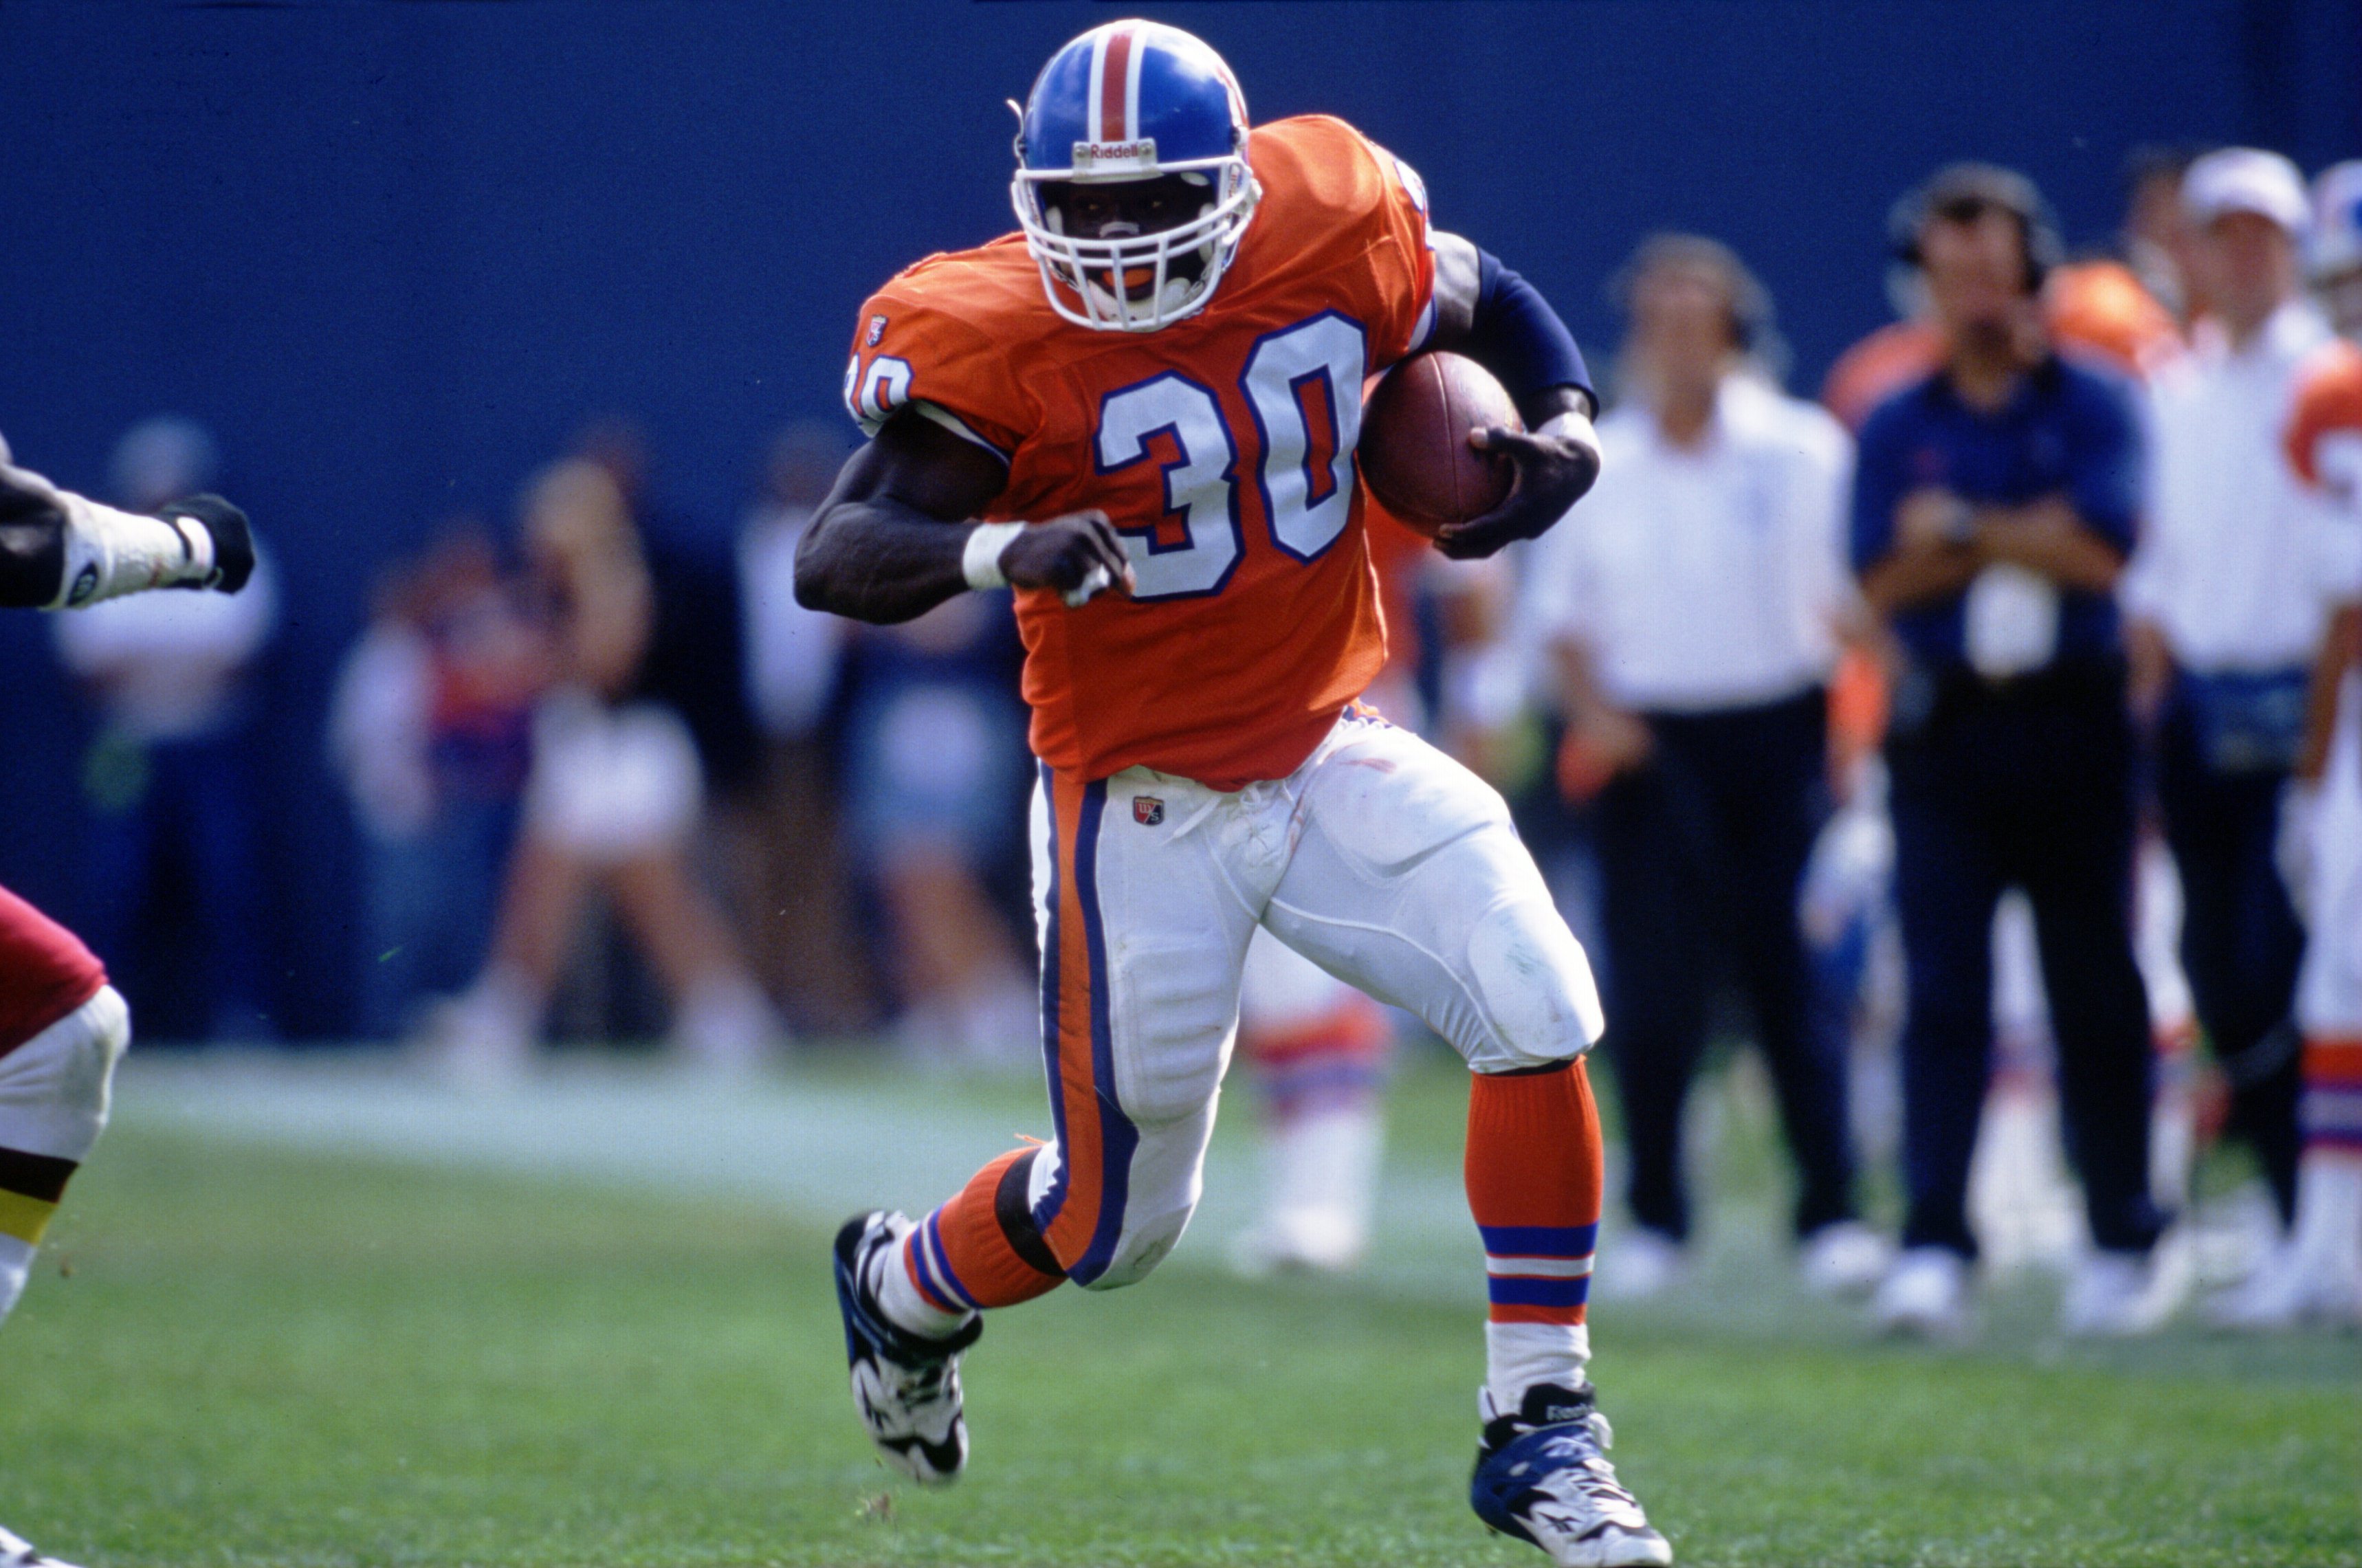 In the end, Terrell Davis' career was long enough